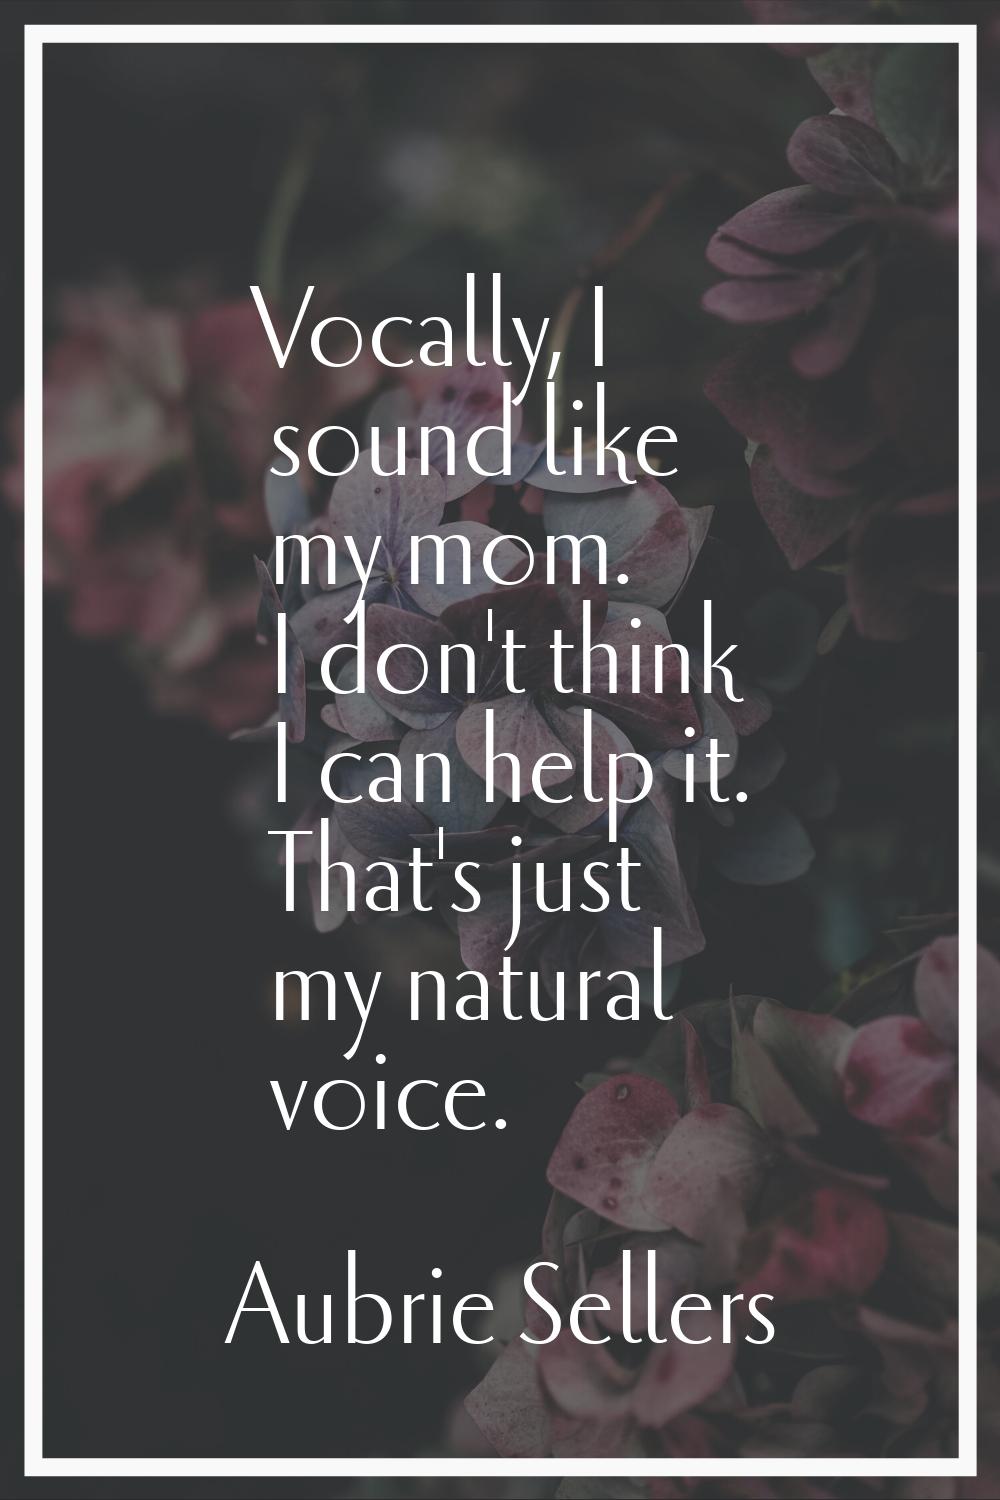 Vocally, I sound like my mom. I don't think I can help it. That's just my natural voice.